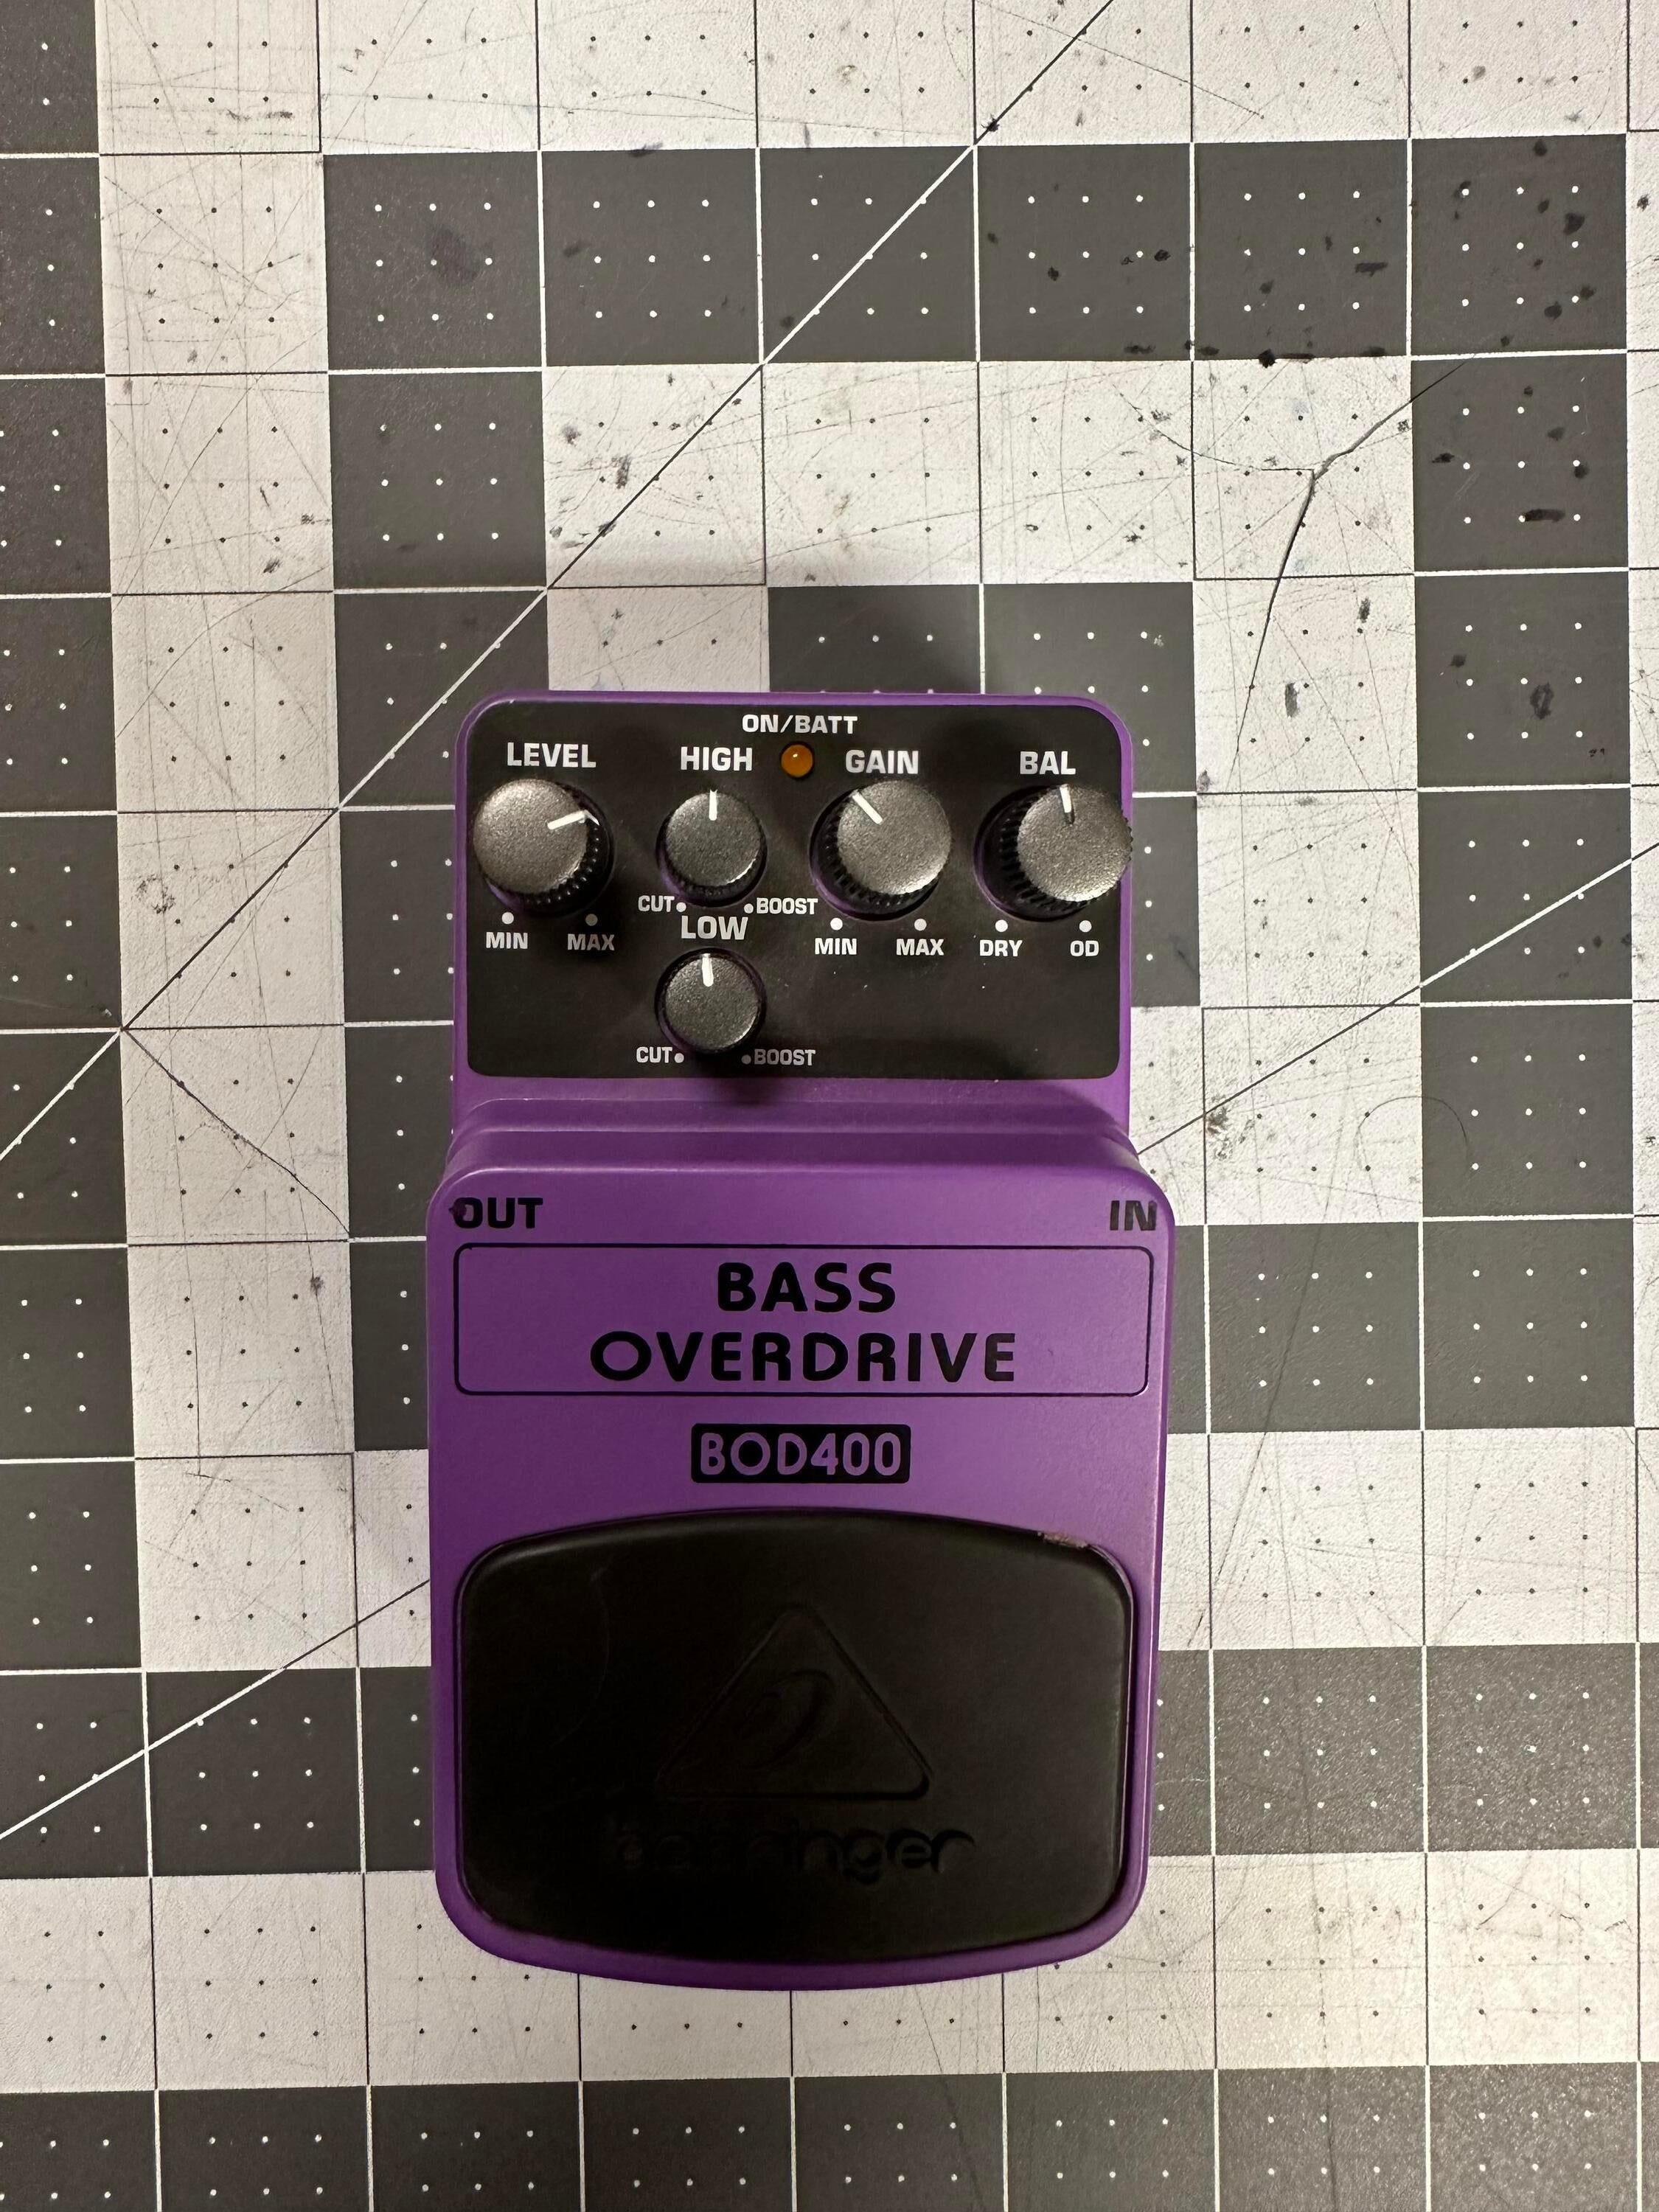 Used Behringer BOD400 Bass Overdrive Pedal - Sweetwater's Gear